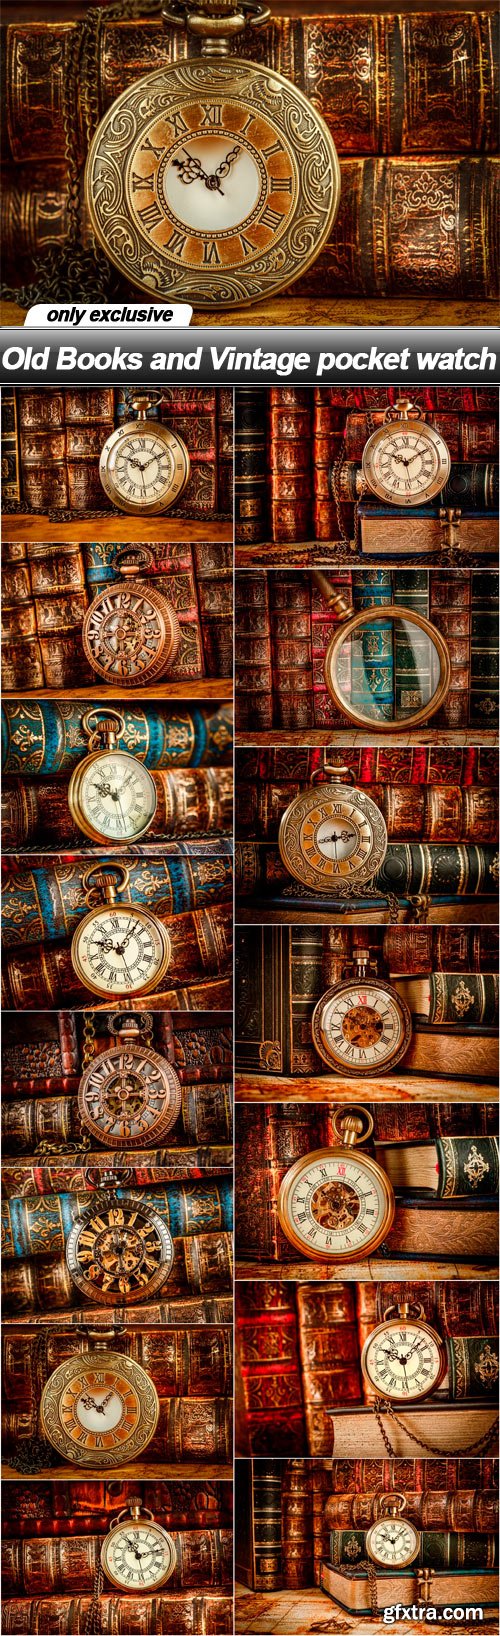 Old Books and Vintage pocket watch - 15 UHQ JPEG